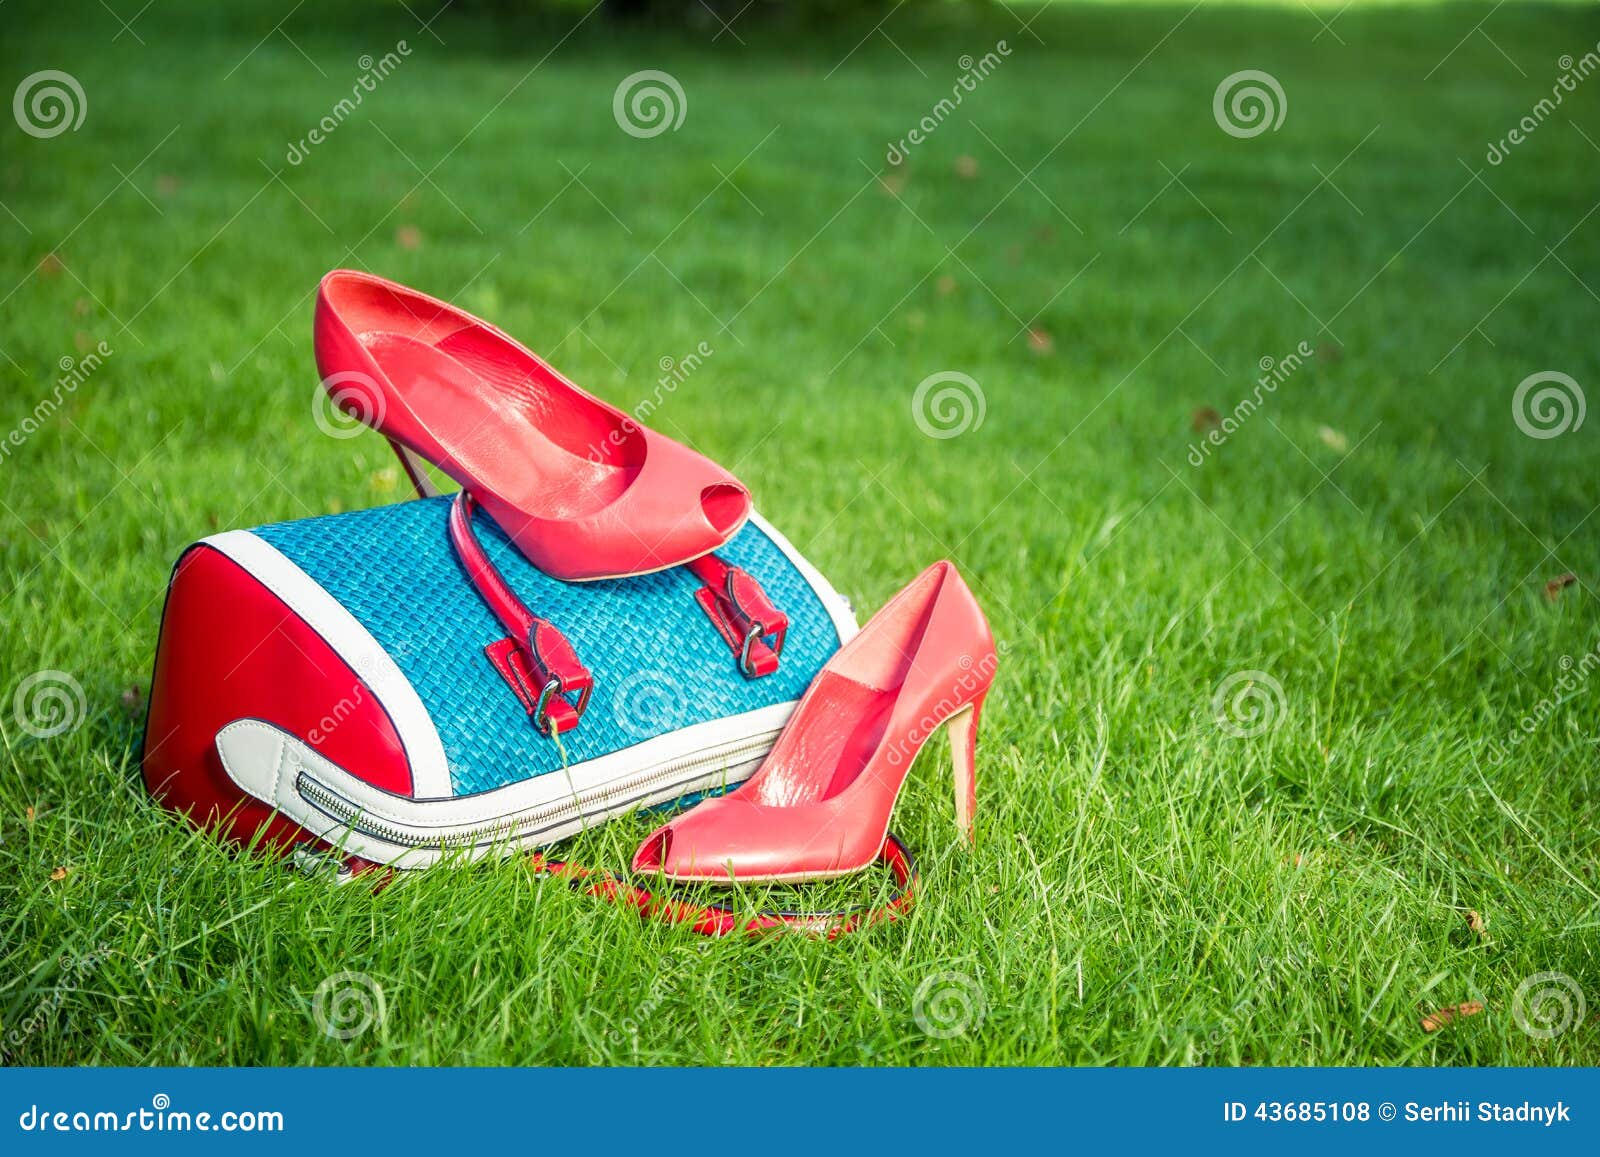 Women S Shoes are on the Bag and on the Ground, Women S Summer Shoes ...